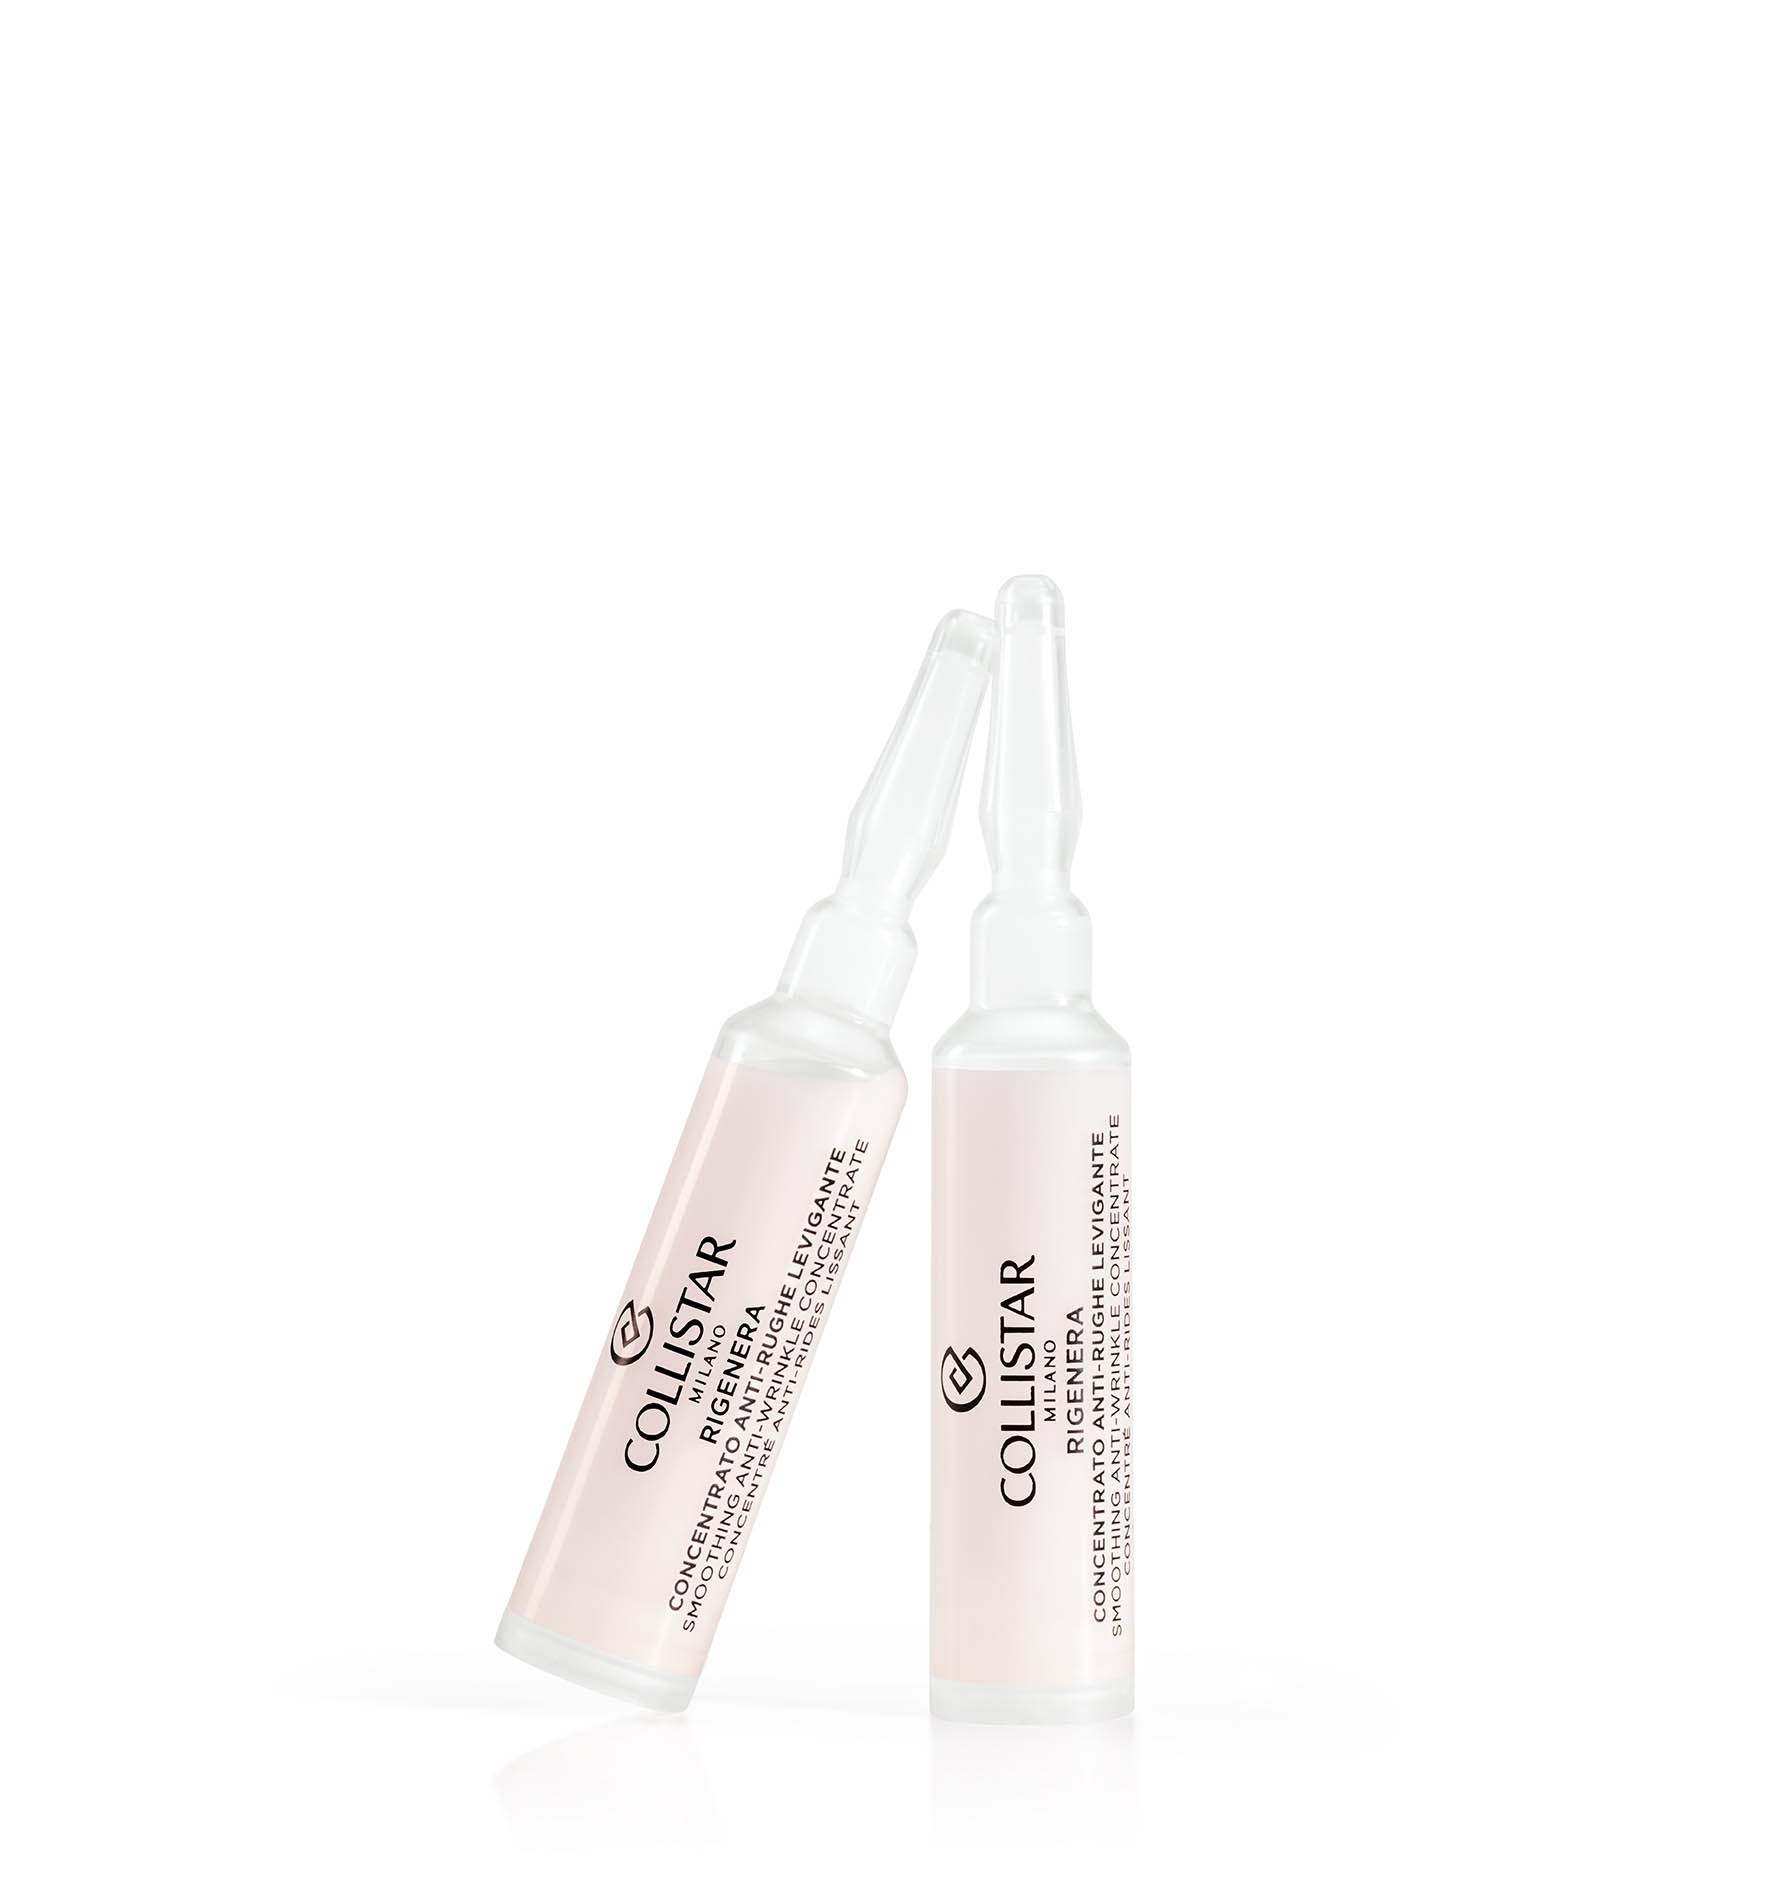 RIGENERA SMOOTHING ANTI-WRINKLE
CONCENTRATE - Serums | Collistar - Shop Online Ufficiale